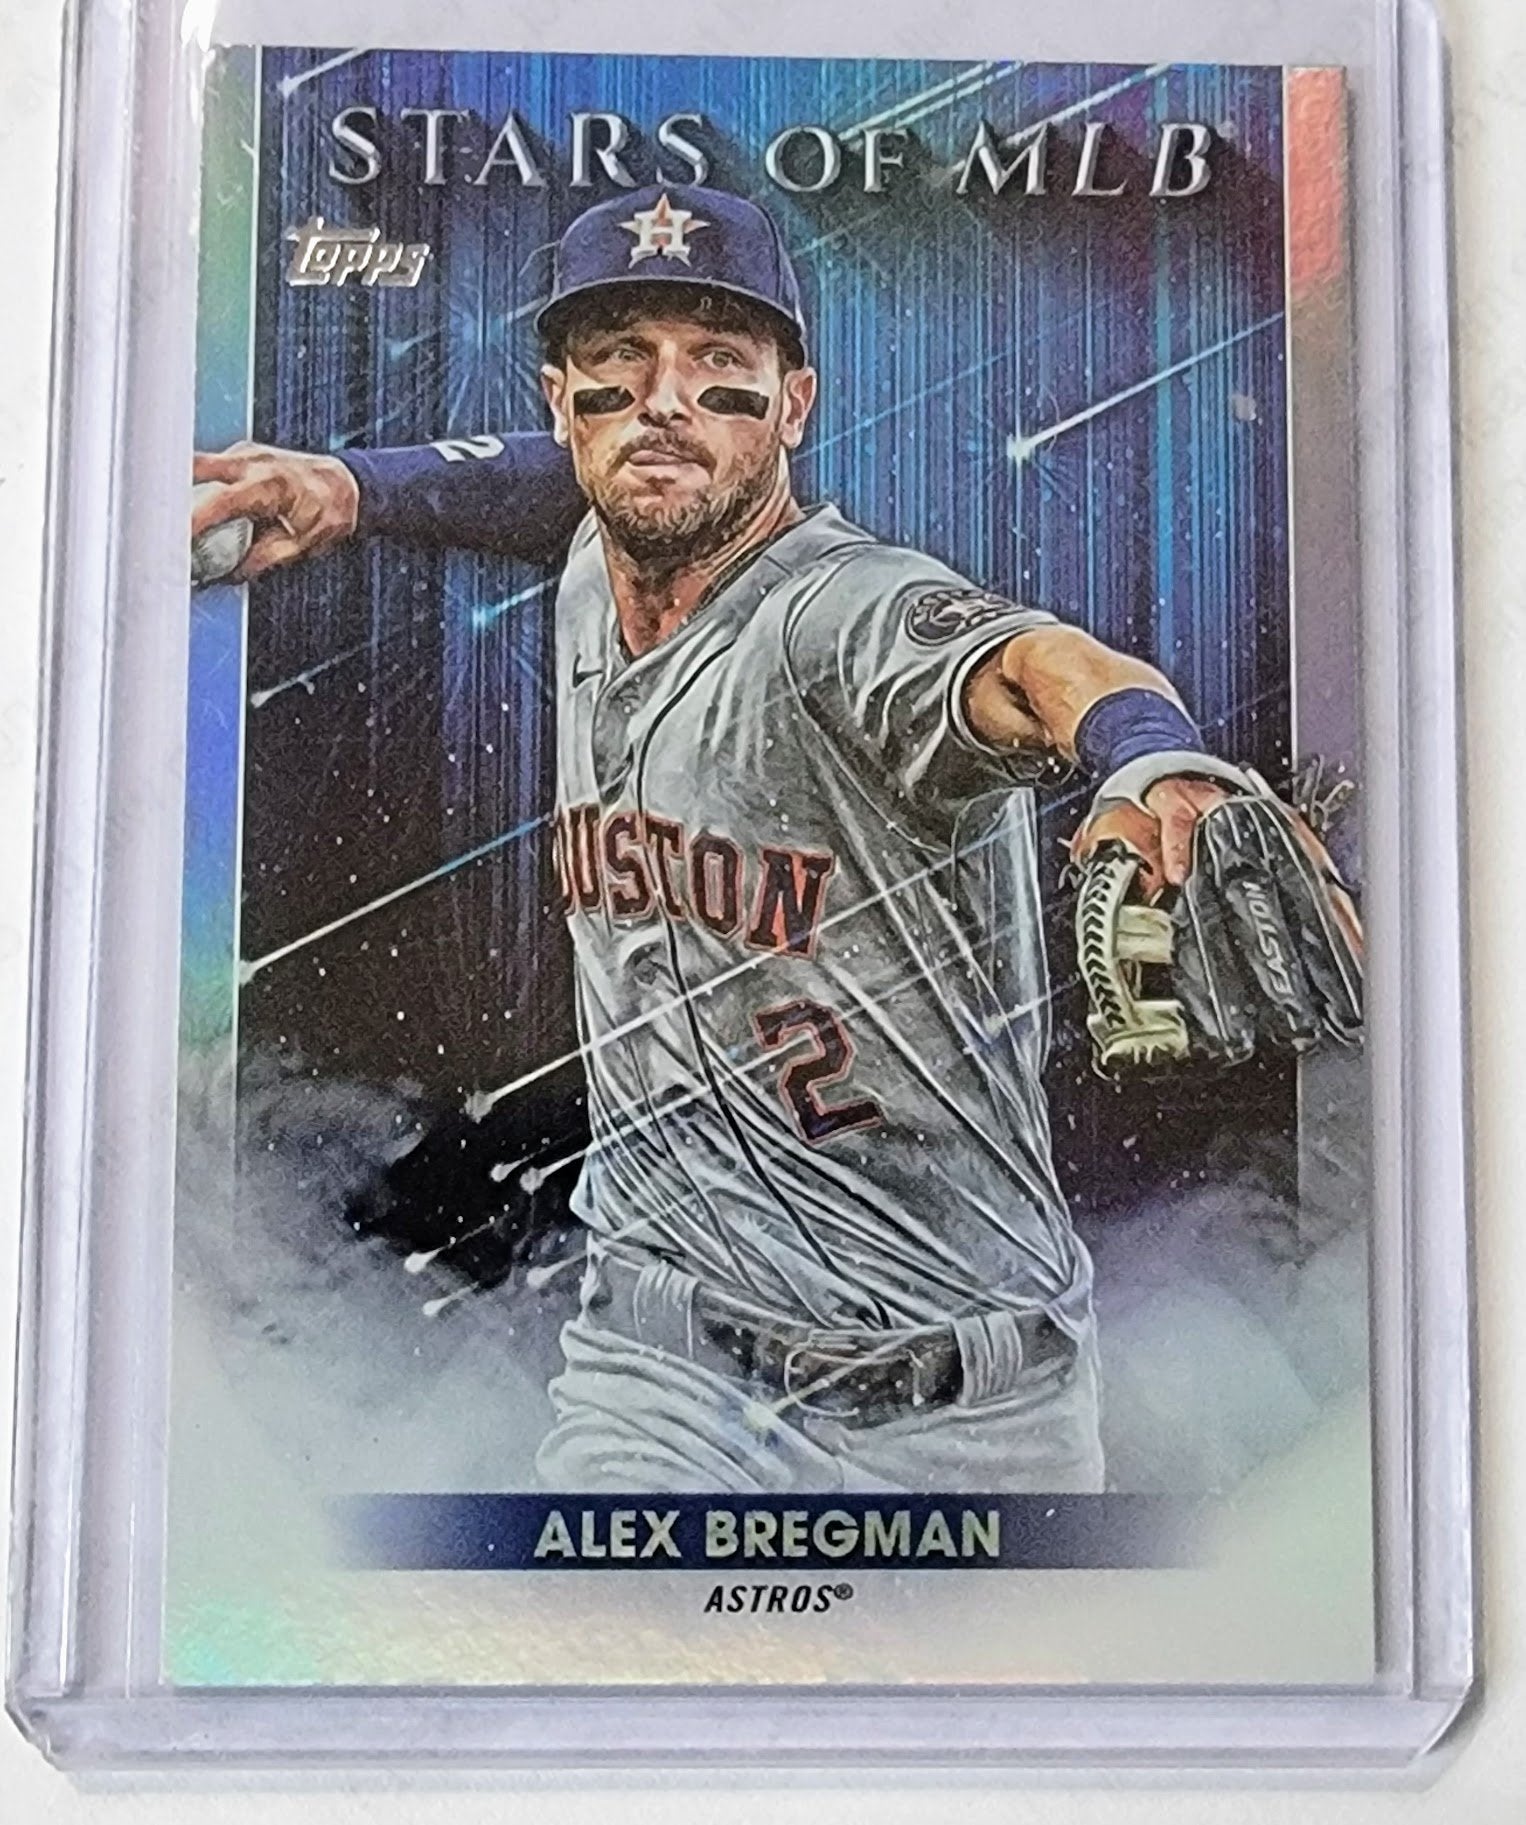 2022 Topps Alex Bregman Stars of the MLB Baseball Trading Card GRB1 simple Xclusive Collectibles   